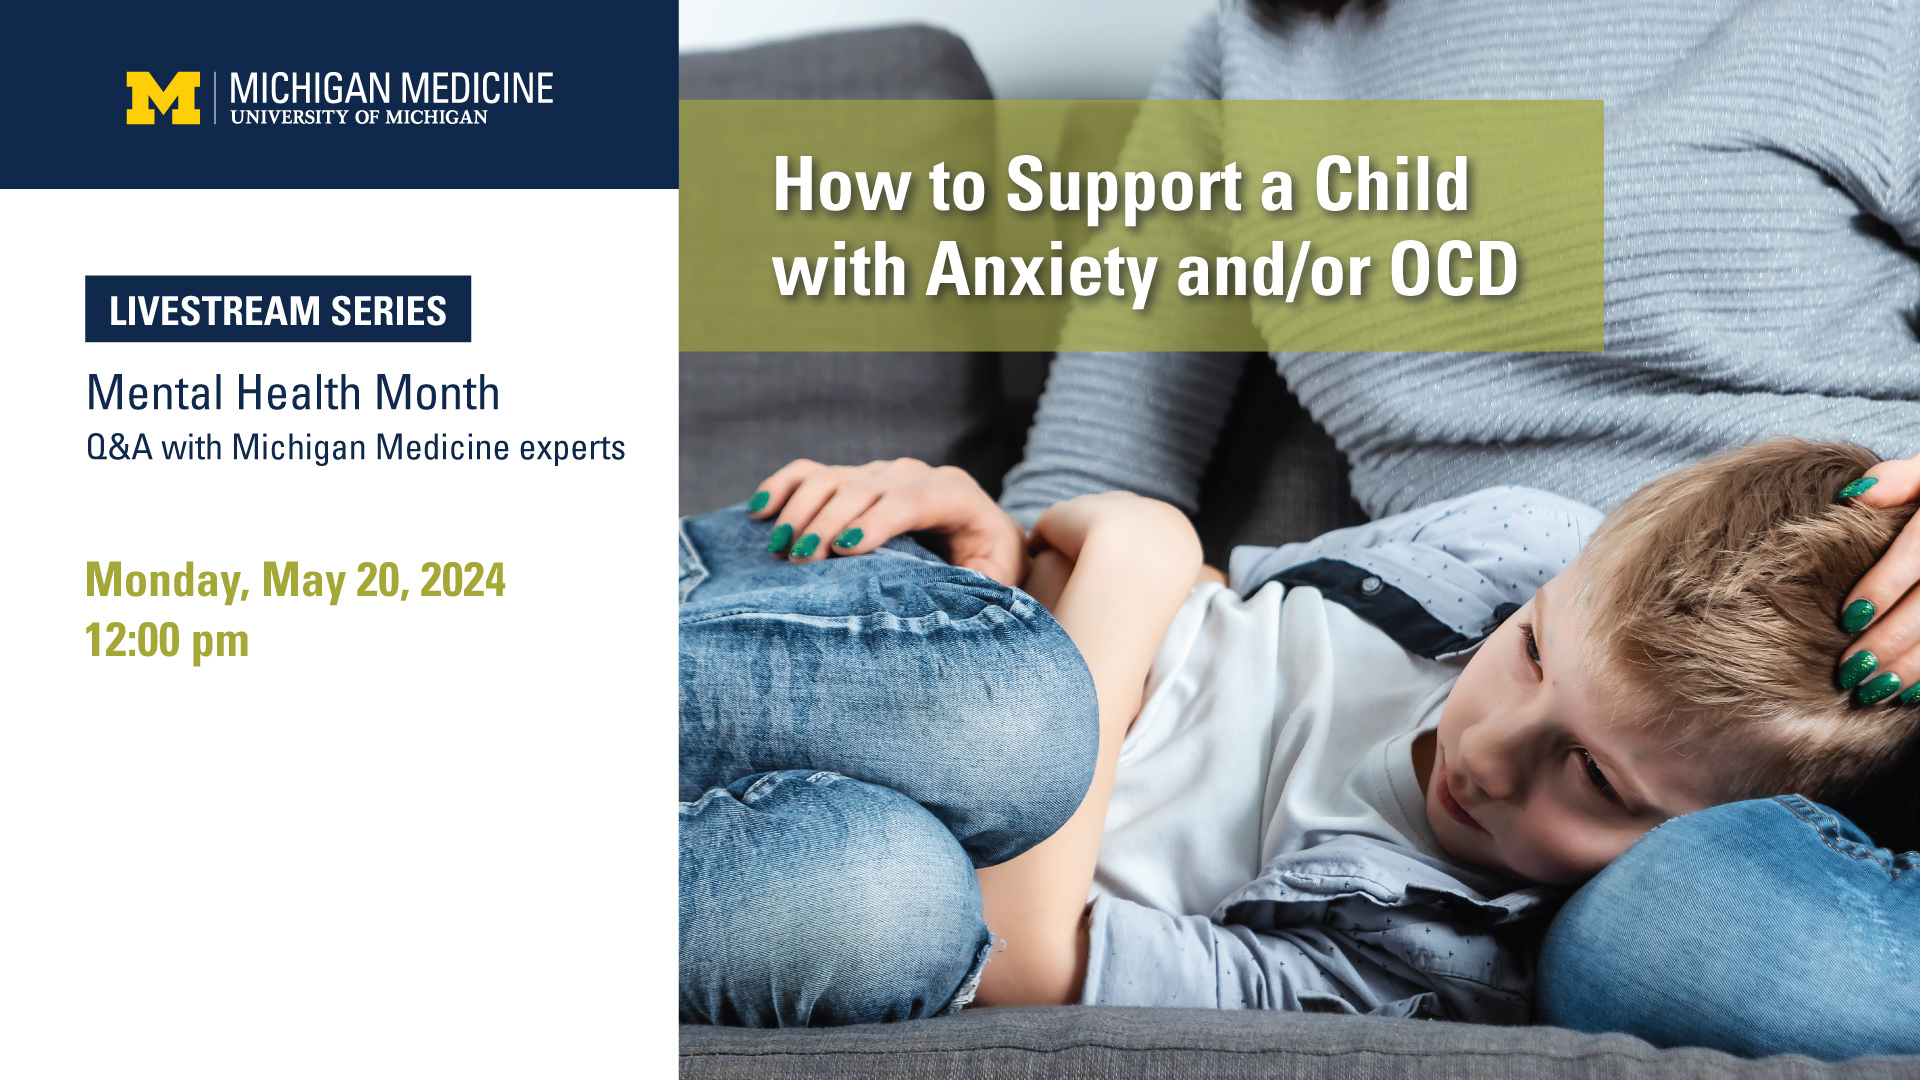 How to support a child with anxiety and/or OCD